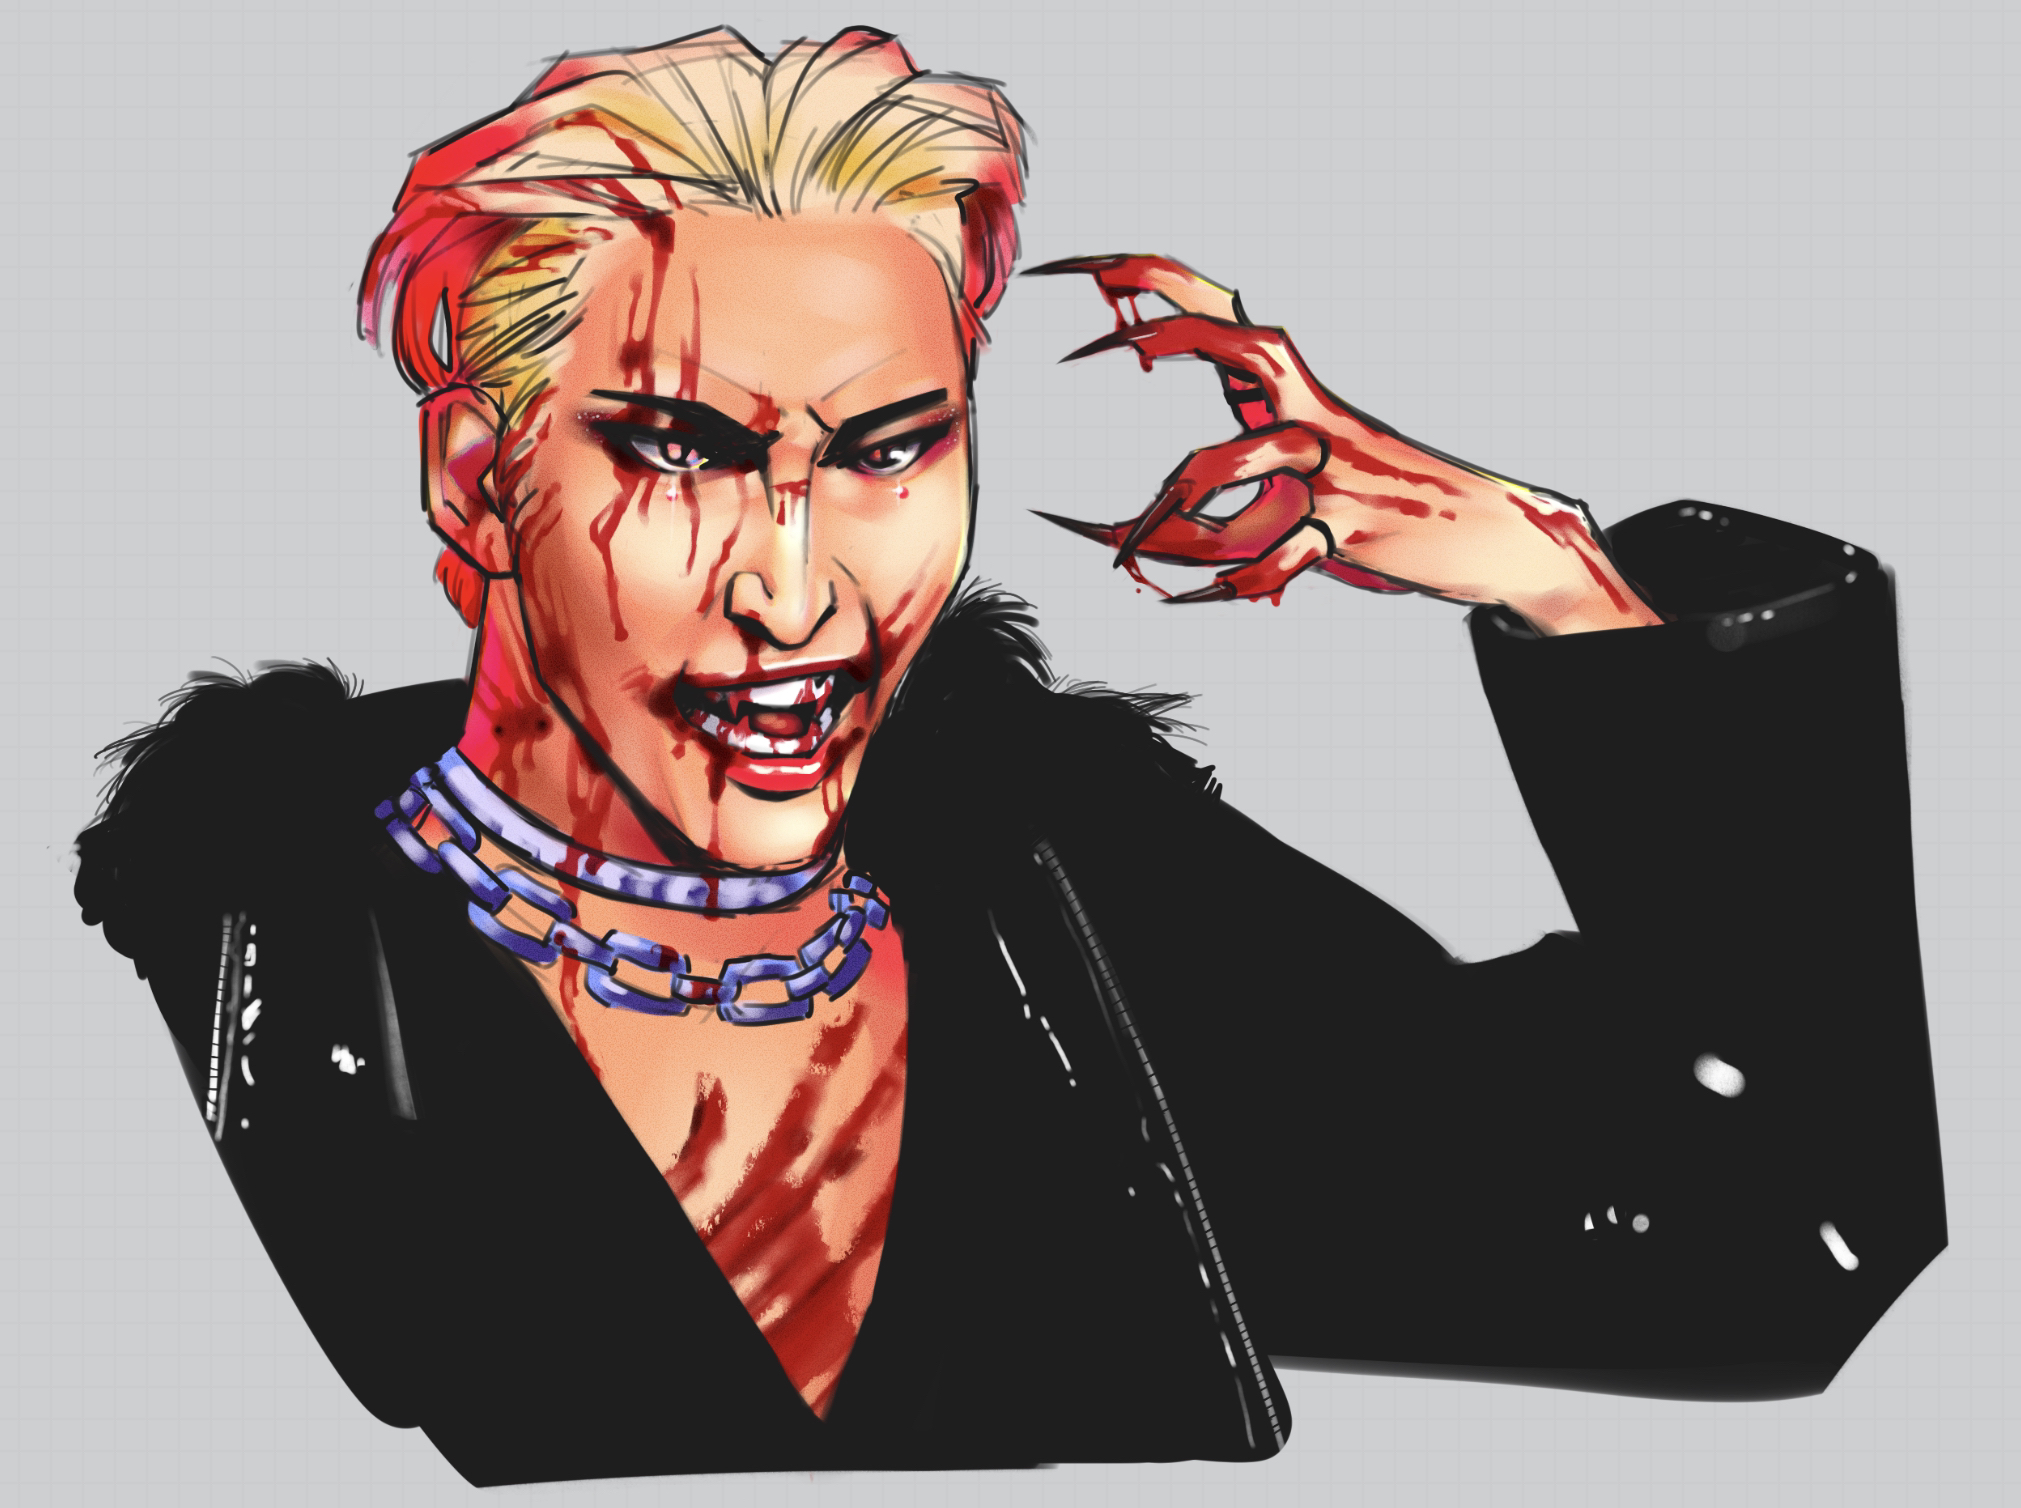 Art of Park Seonghwa from ATEEZ as a vampire, covered in blood.